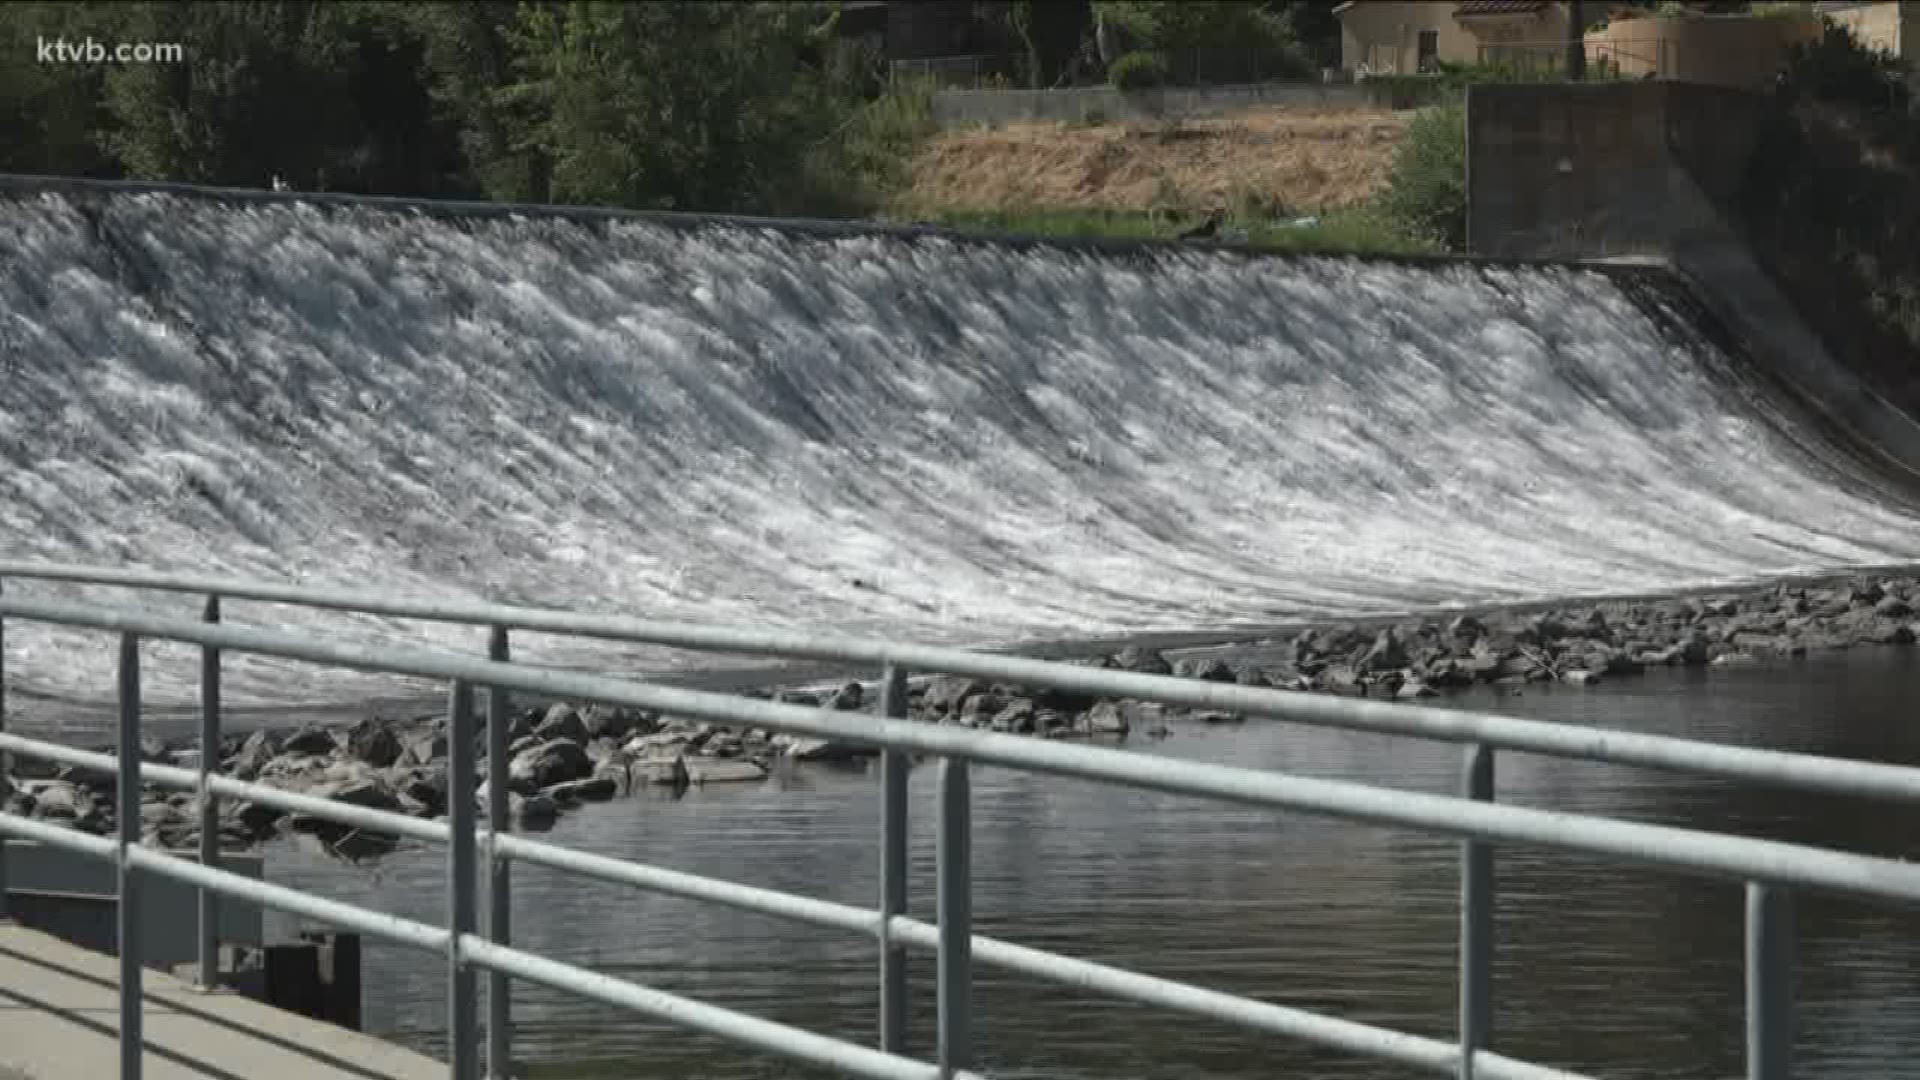 It is a recurring problem. The Idaho Department of Water Resources says this is the sixth time it has happened this year.